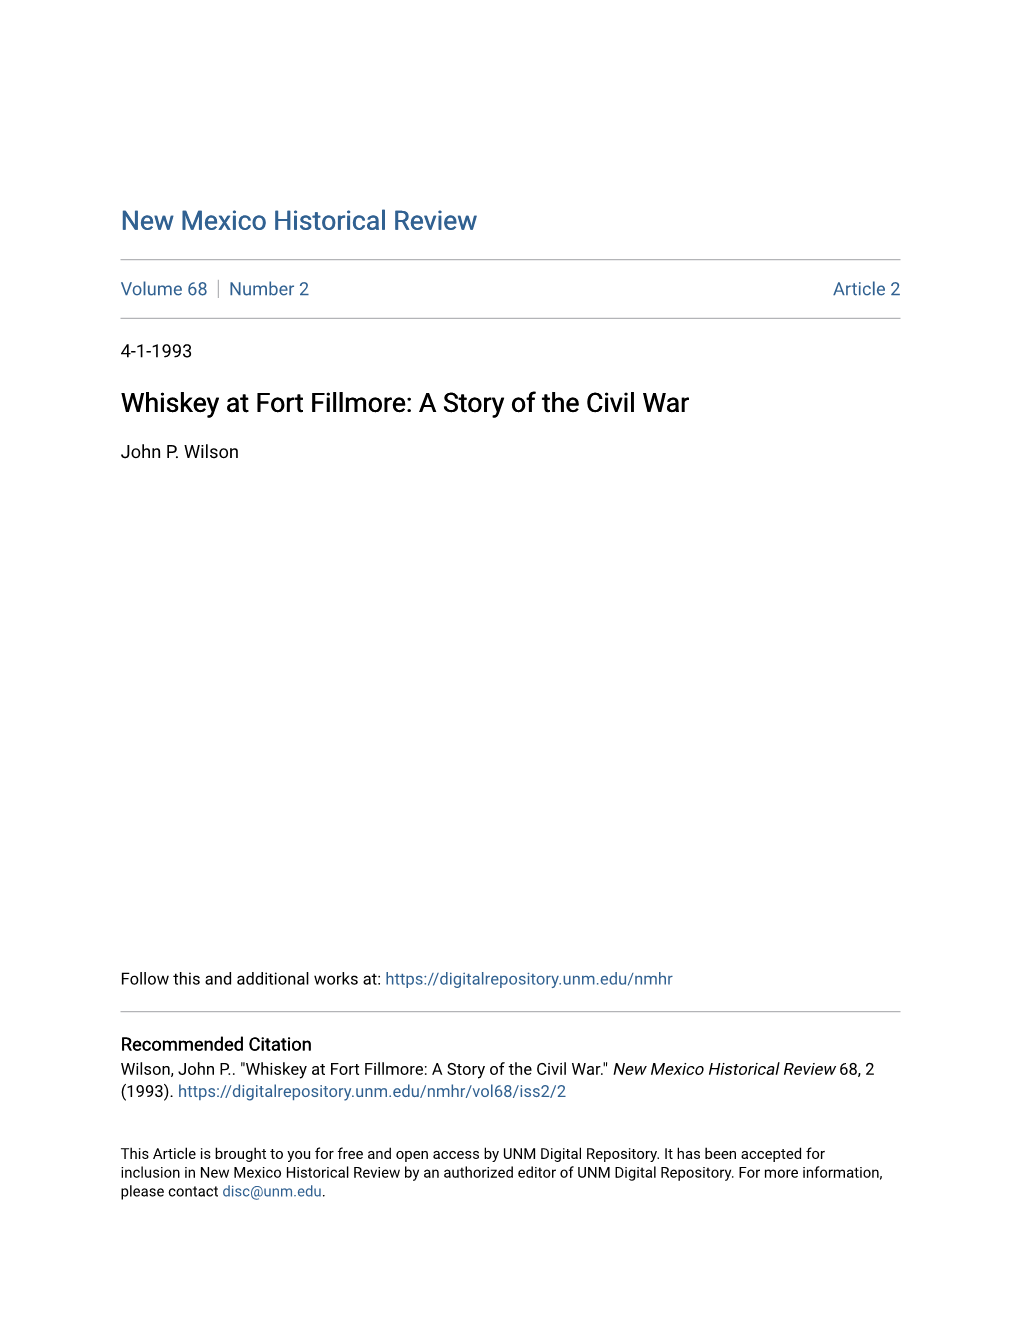 Whiskey at Fort Fillmore: a Story of the Civil War